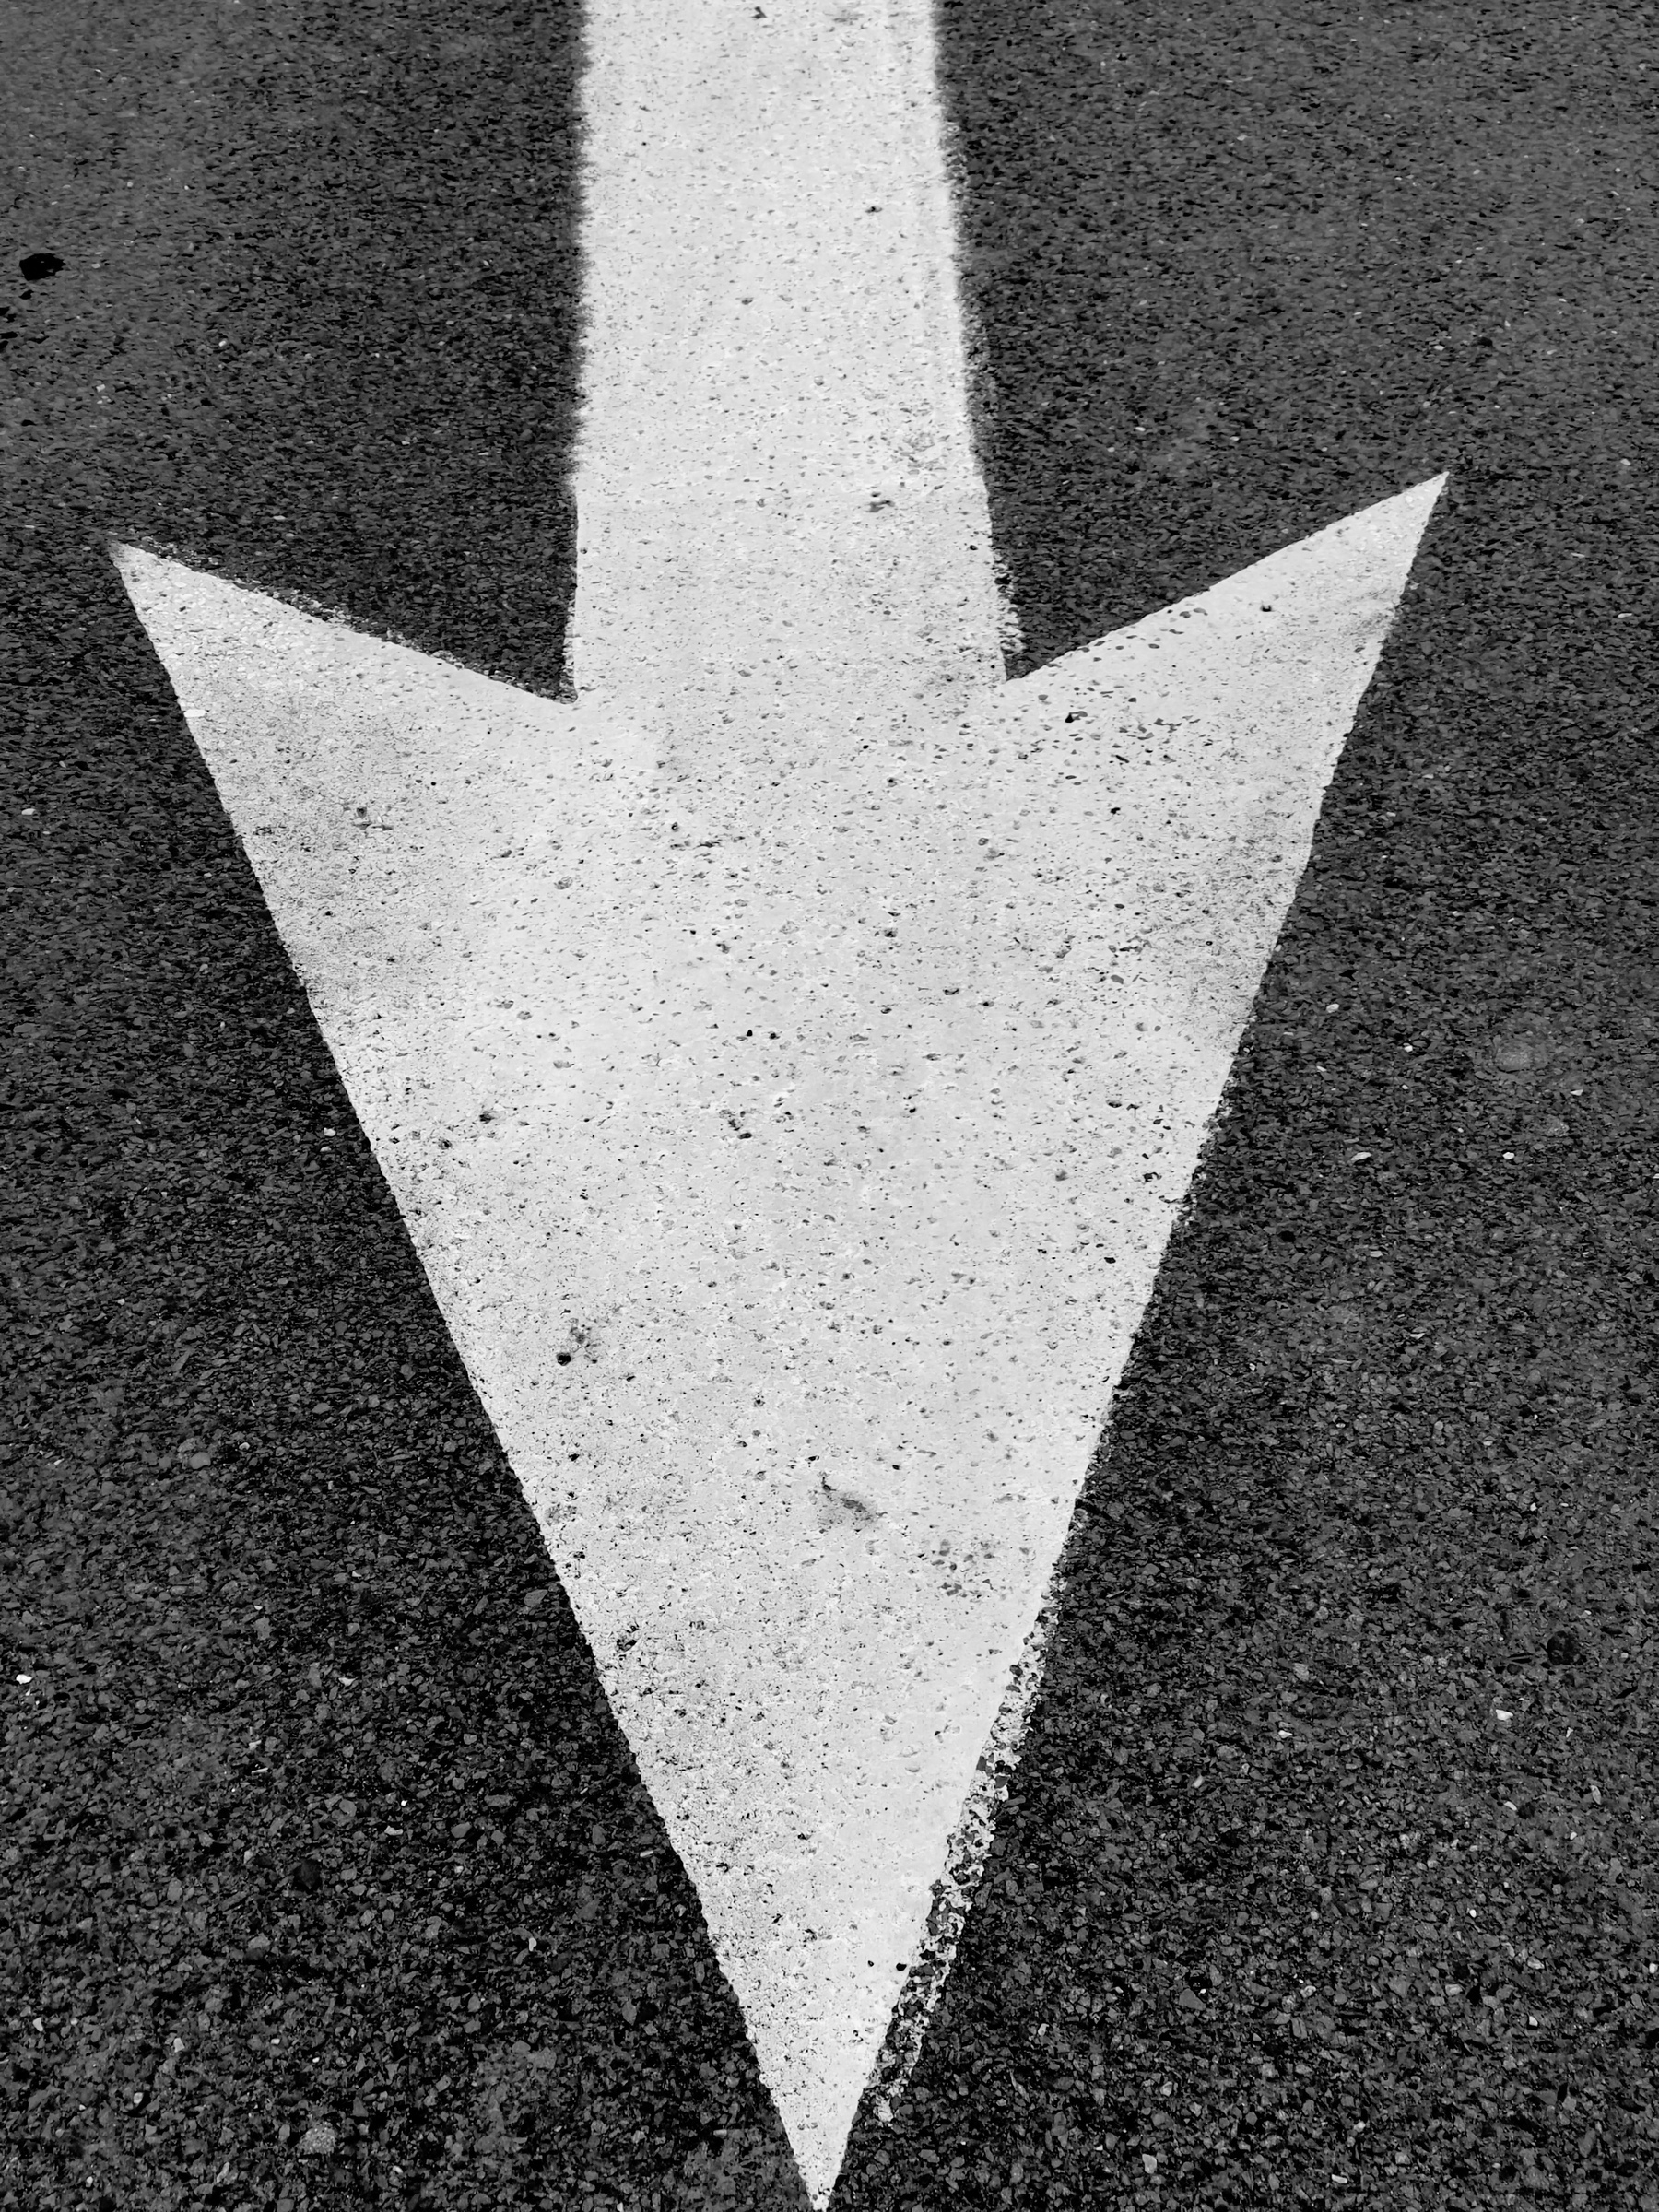 White painted directional arrow on asphalt. Black and white.